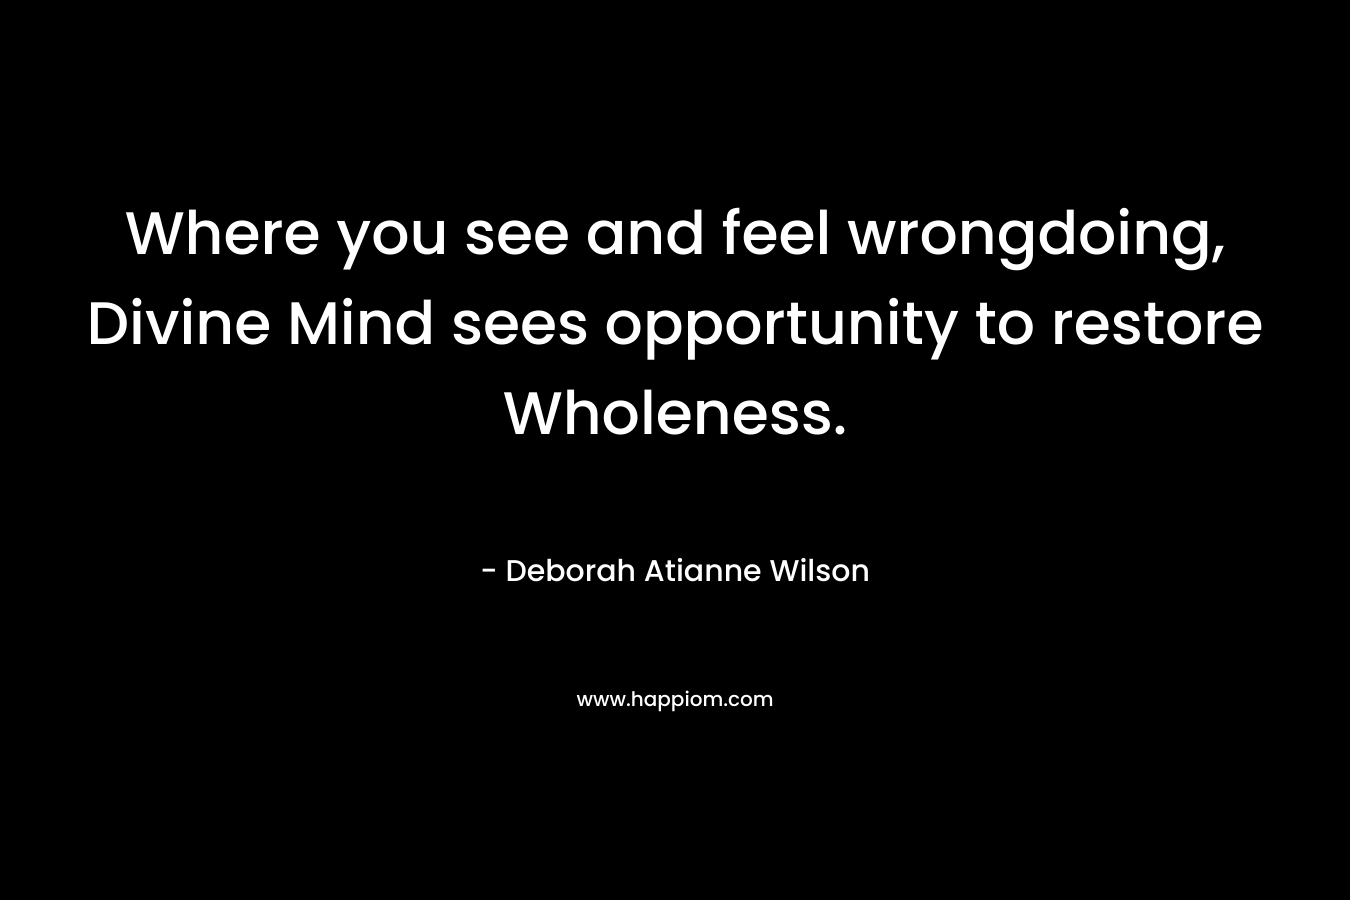 Where you see and feel wrongdoing, Divine Mind sees opportunity to restore Wholeness. – Deborah Atianne Wilson